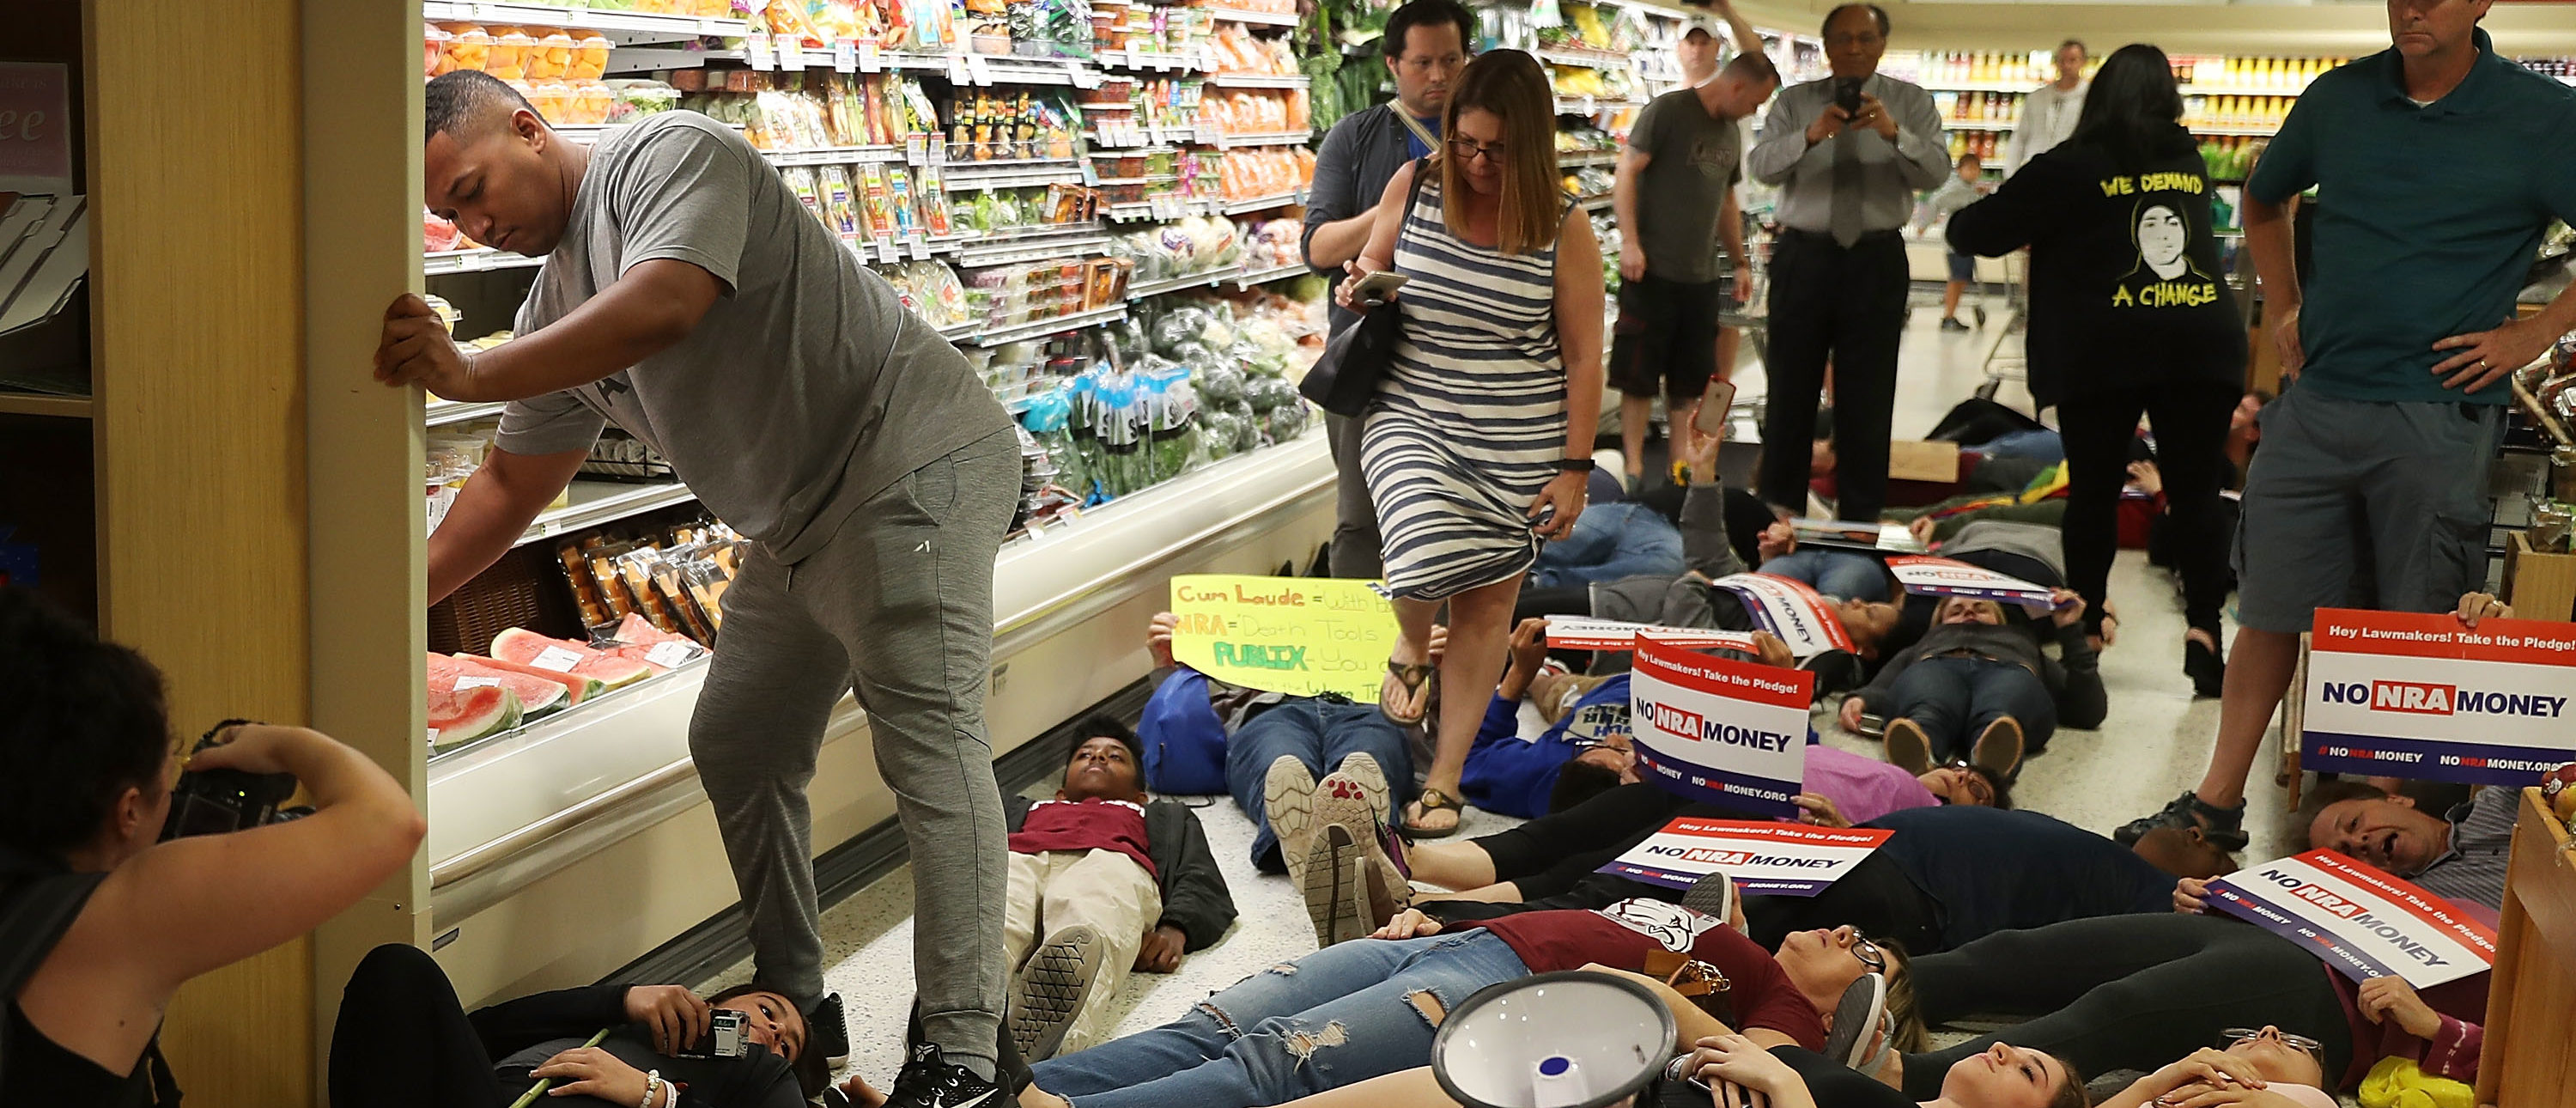 CORAL SPRINGS, FL - MAY 25: Protesters participate in a "die'-in" protest in a Publix supermarket on May 25, 2018 in Coral Springs, Florida. The activists many of whom are Marjory Stoneman Douglas High School students entered the Publix store to protest against the company's support of political candidates endorsed by the National Rifle Association who oppose gun reform. (Photo by Joe Raedle/Getty Images)